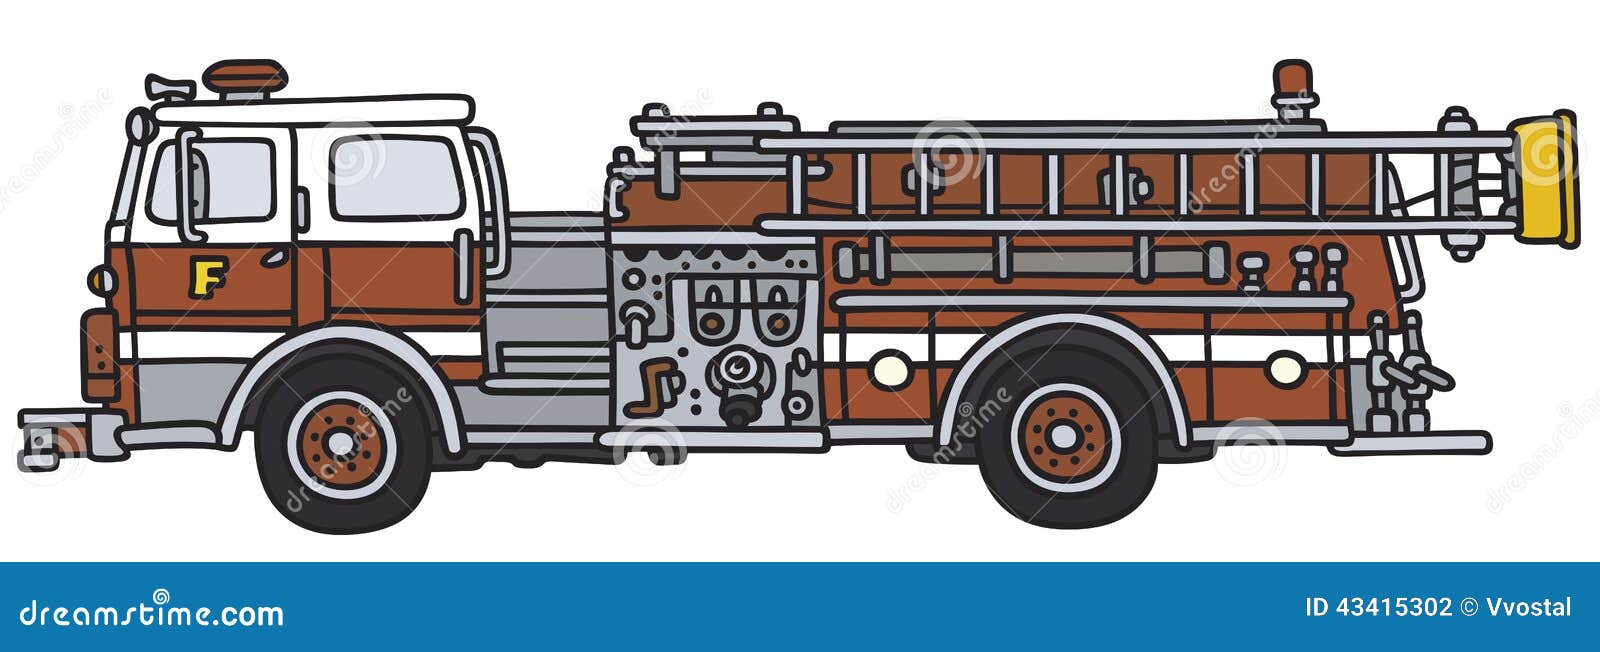 How To Draw A Fire Truck Step by Step  15 Easy Phase